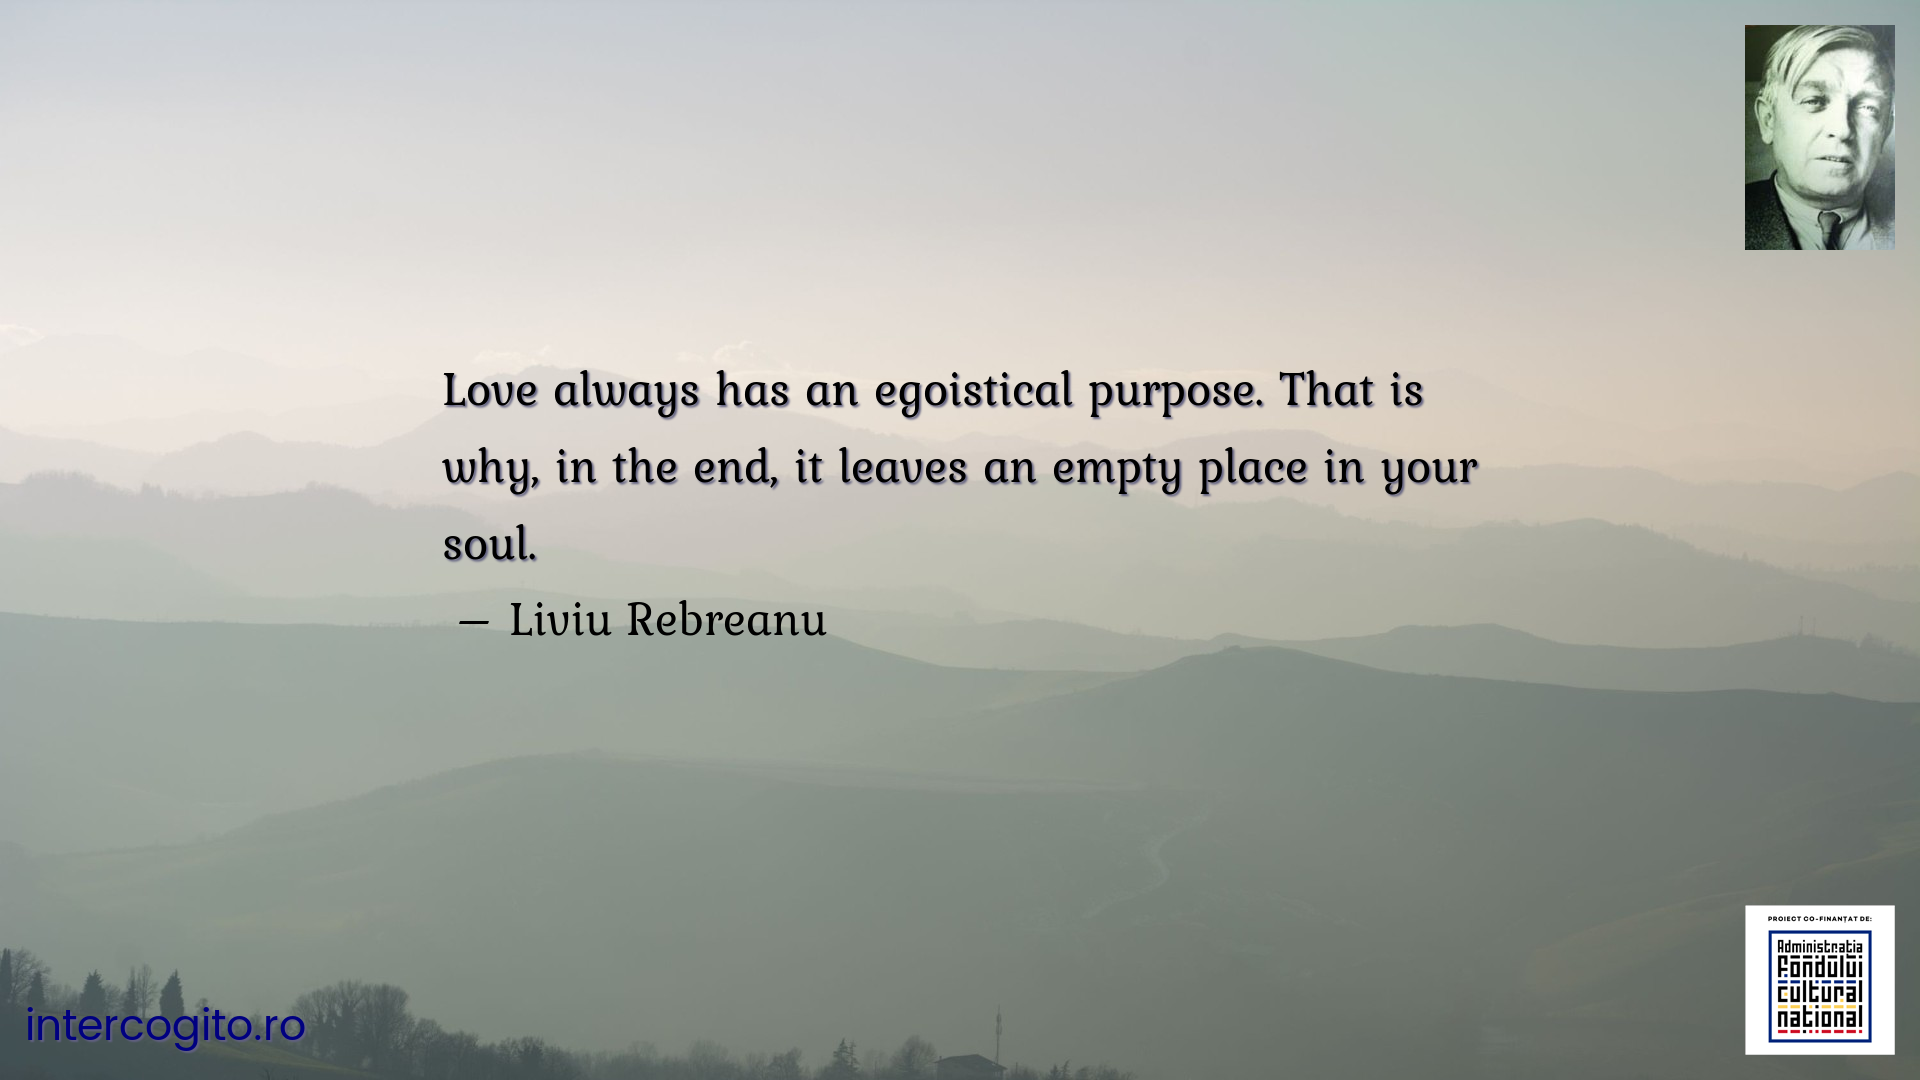 Love always has an egoistical purpose. That is why, in the end, it leaves an empty place in your soul.